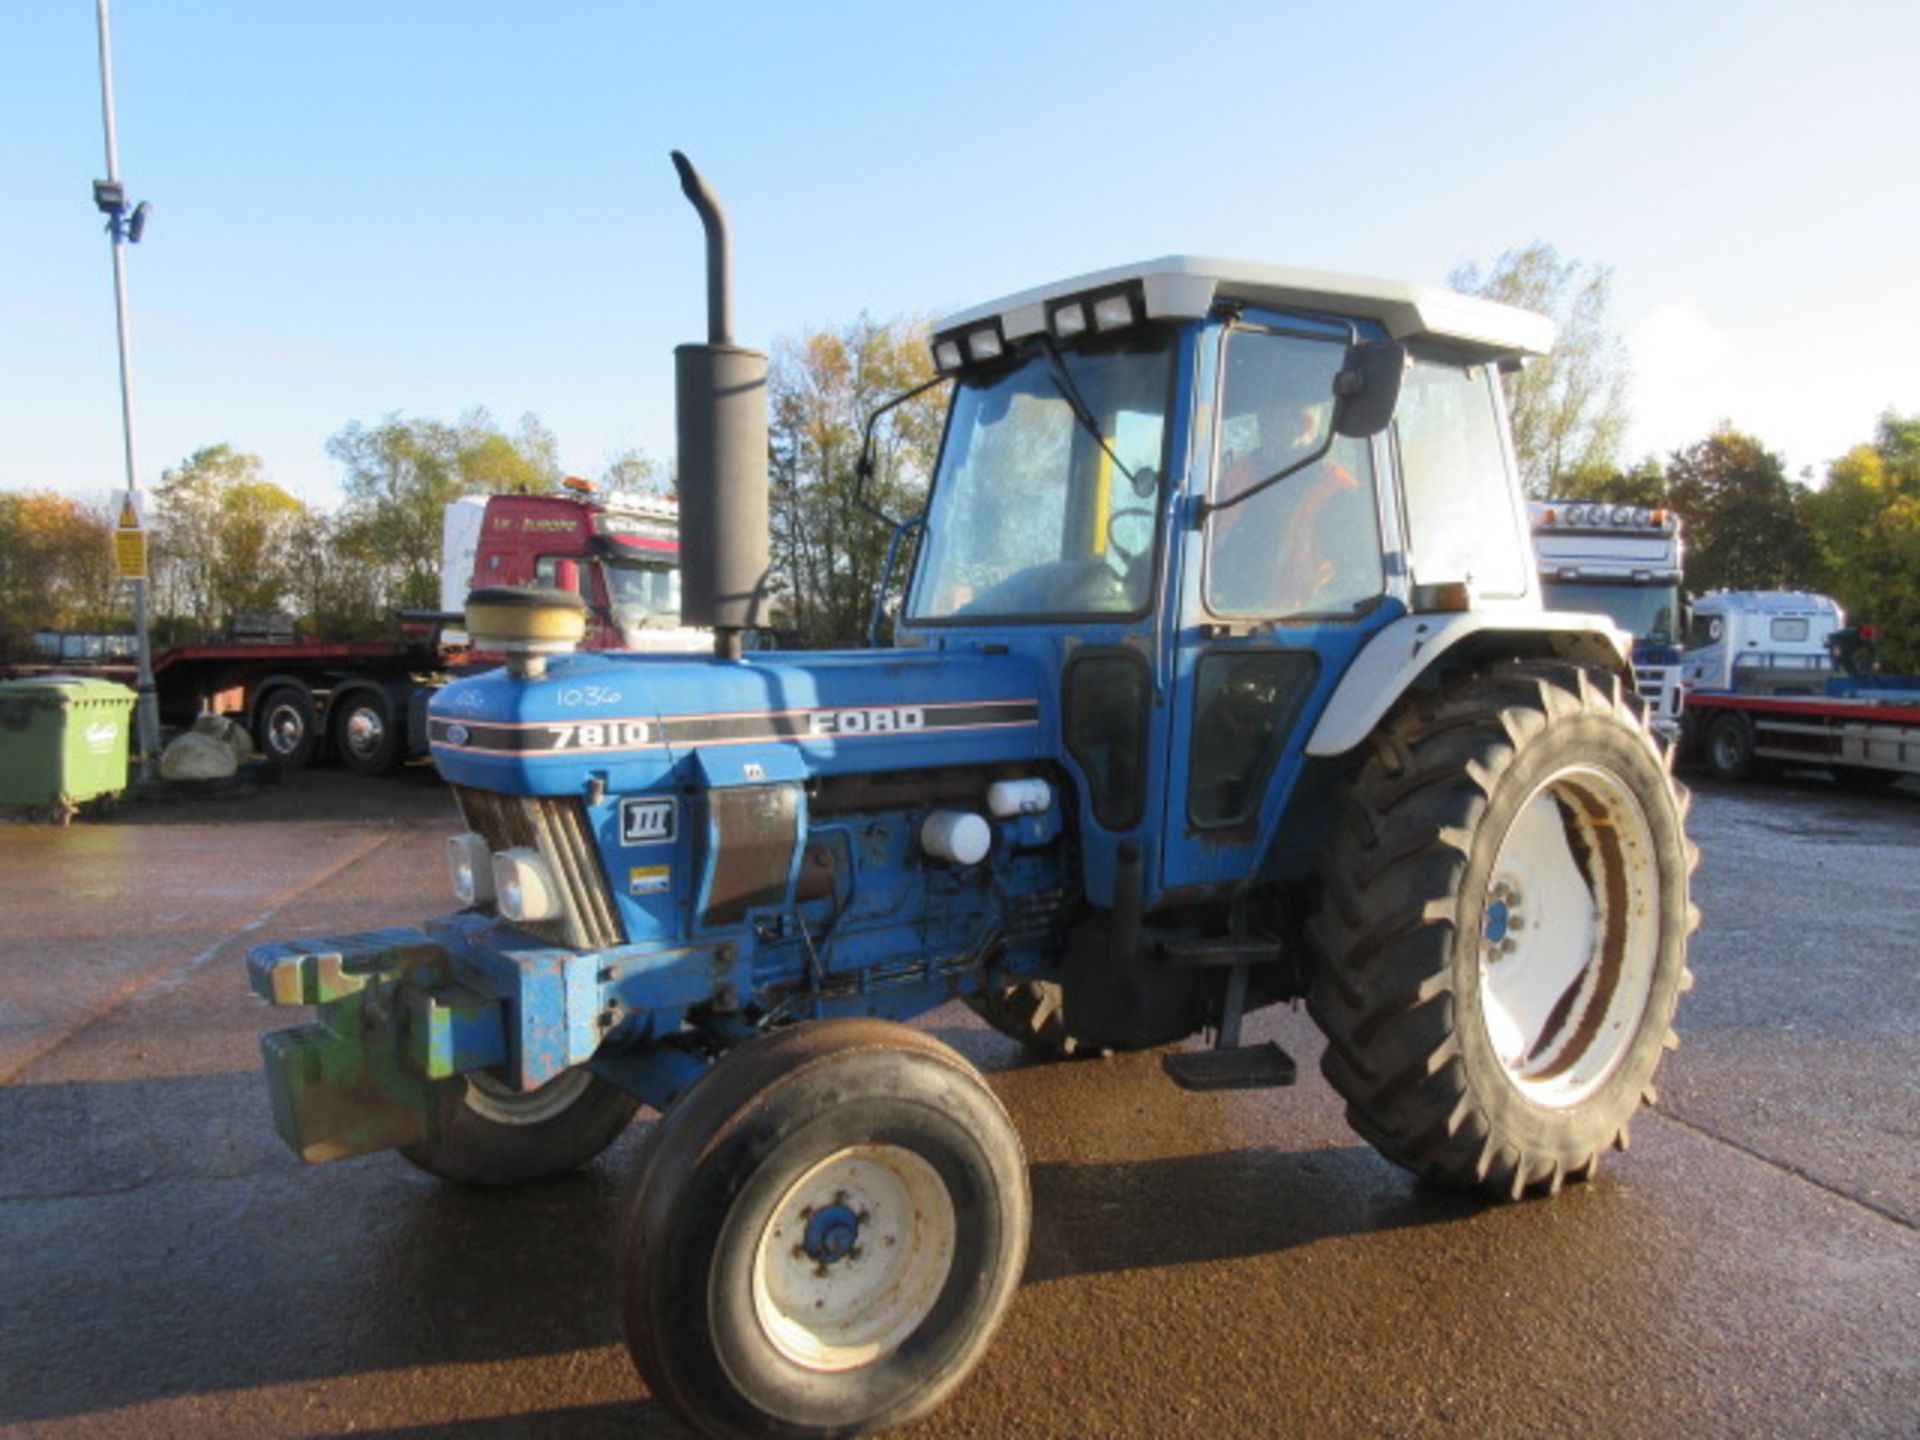 1991 Ford 7810 Series 3 2wd Tractor